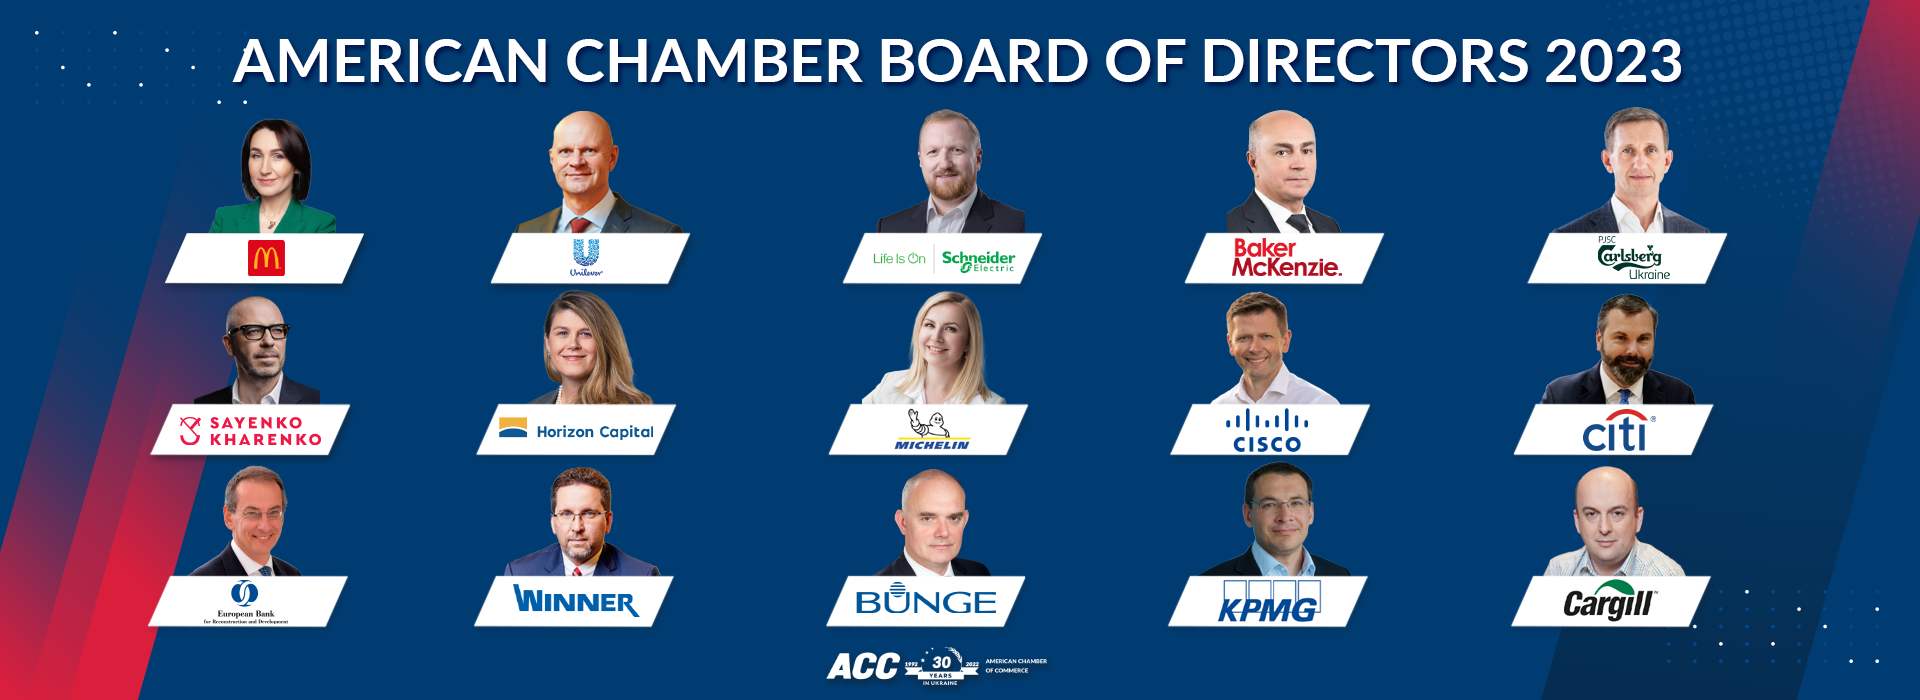 2023 American Chamber Board of Directors Election Results